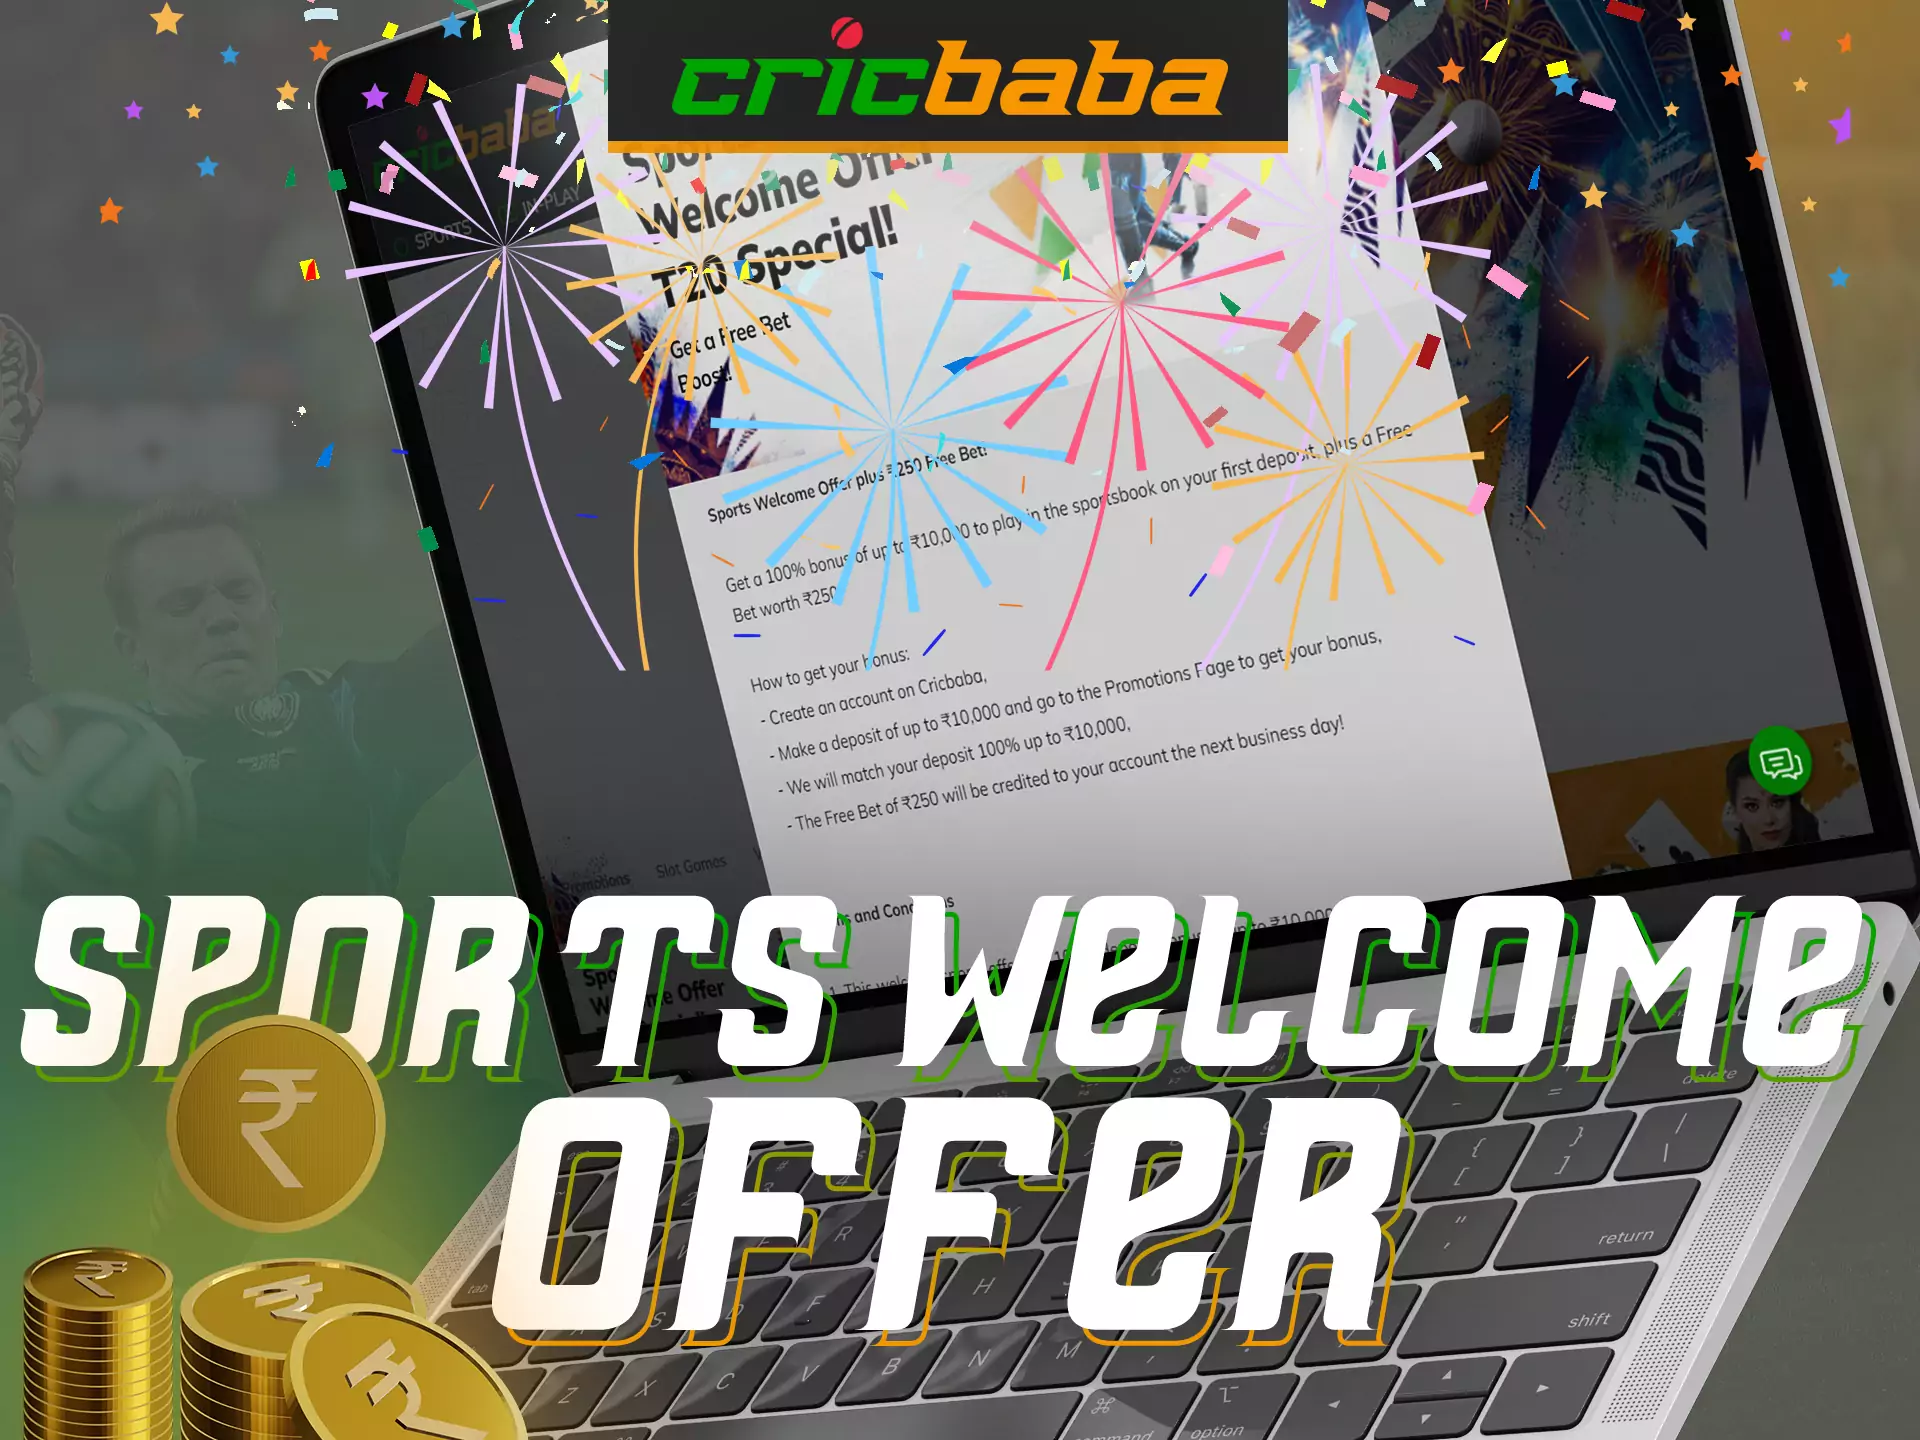 Take benefit of the welcome sports offer from Cricbaba, play with pleasure.